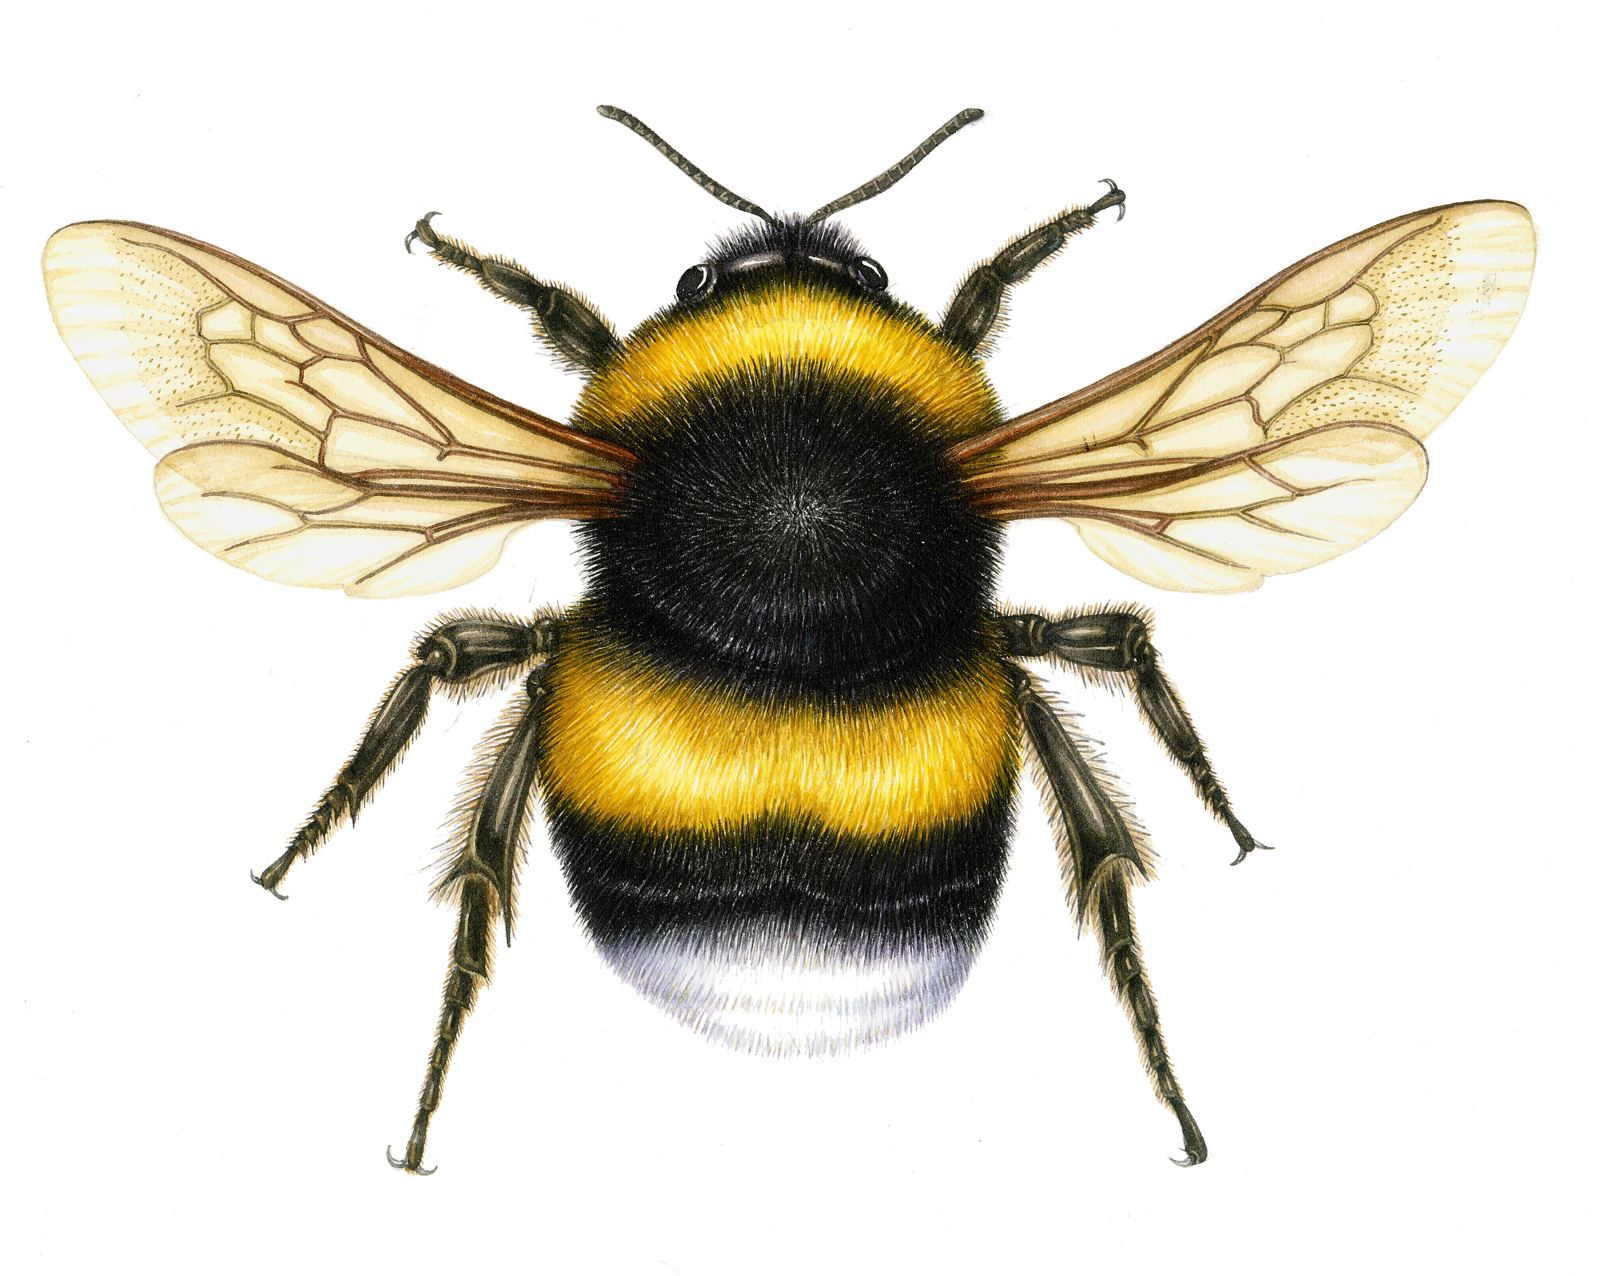 Free Bumble Bee Illustration, Download Free Bumble Bee Illustration png